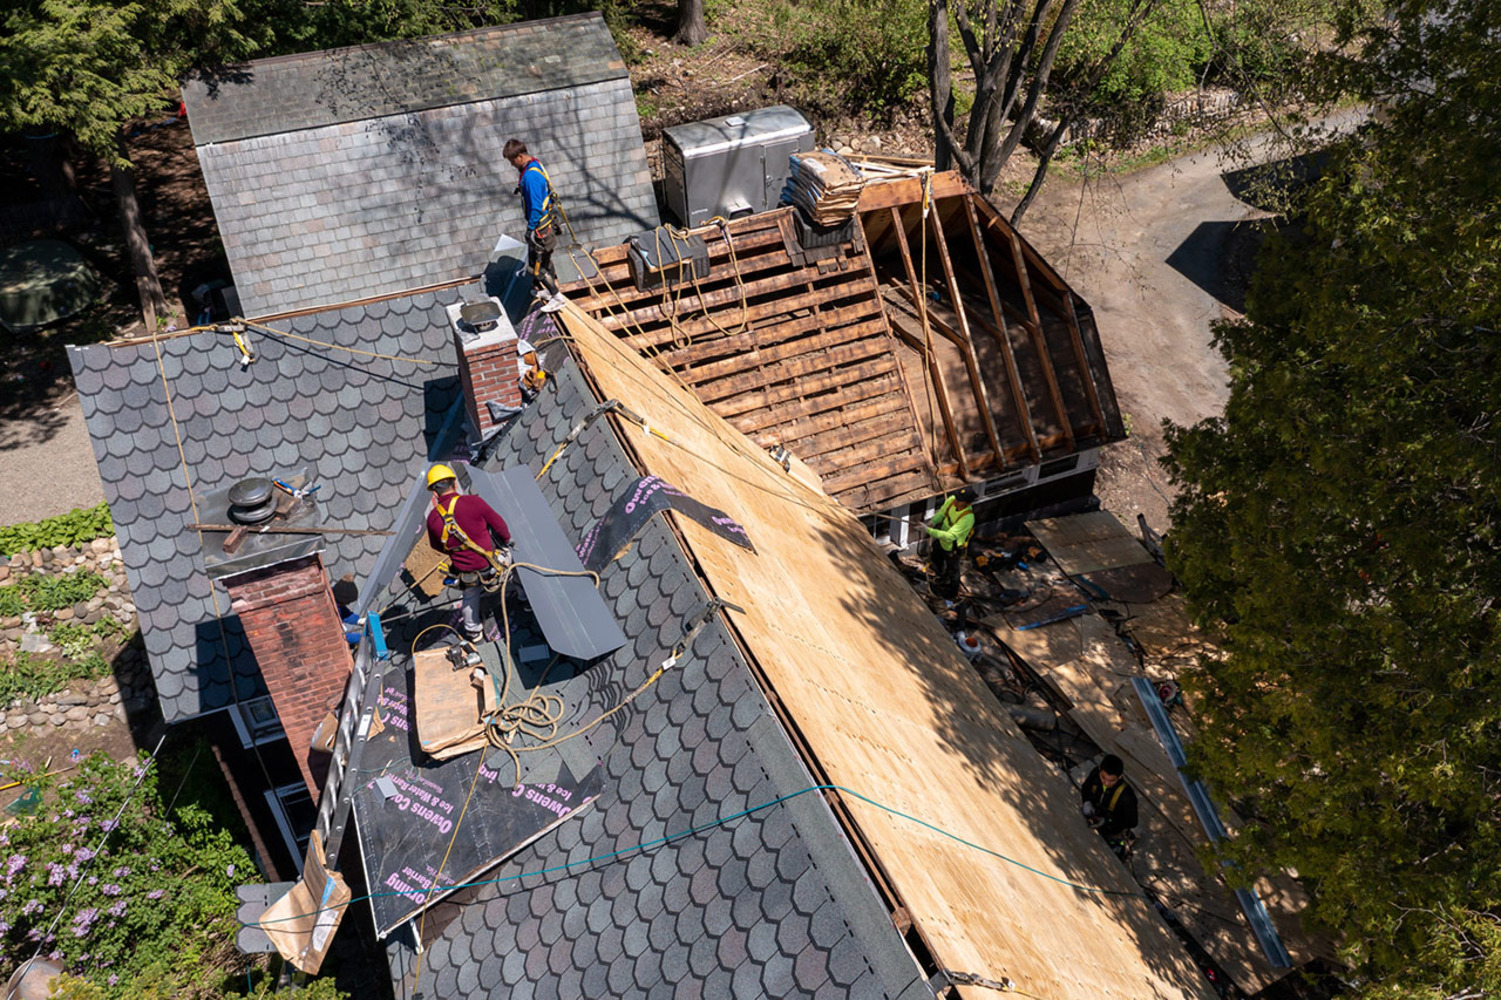 Best Roofers for Roof Repair and Roof Replacement. Pinnacle Roofing provides free roofing estimates for new roofs or leaky roof repairs.